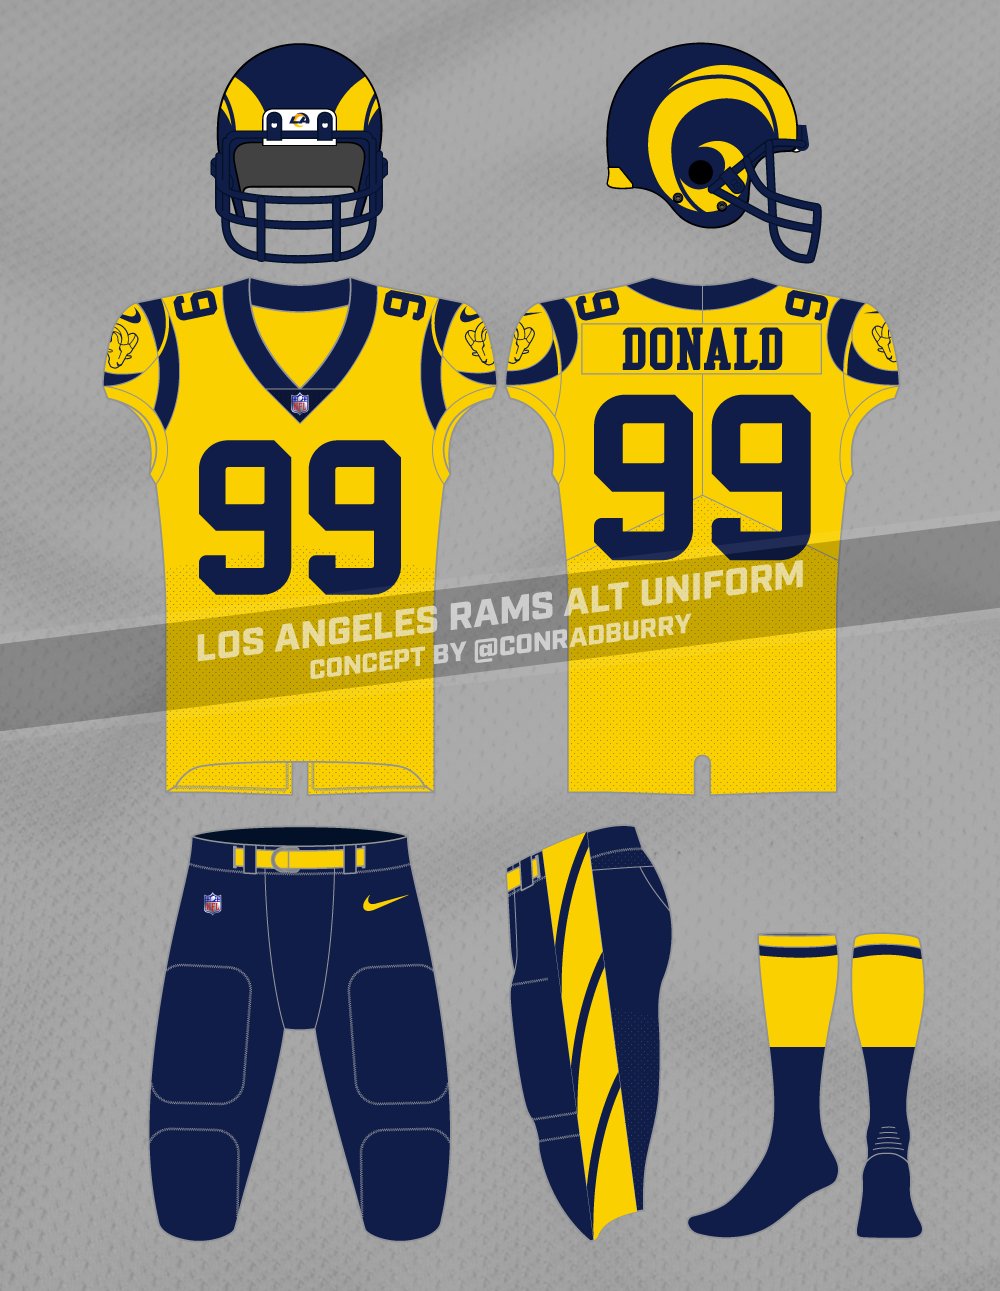 Conrad Burry 🔴🐐🎨 on X: It's about time I weigh in on the Rams new  branding, so here's uniform ideas based on the new logos / colors. Tried to  modernize the classic